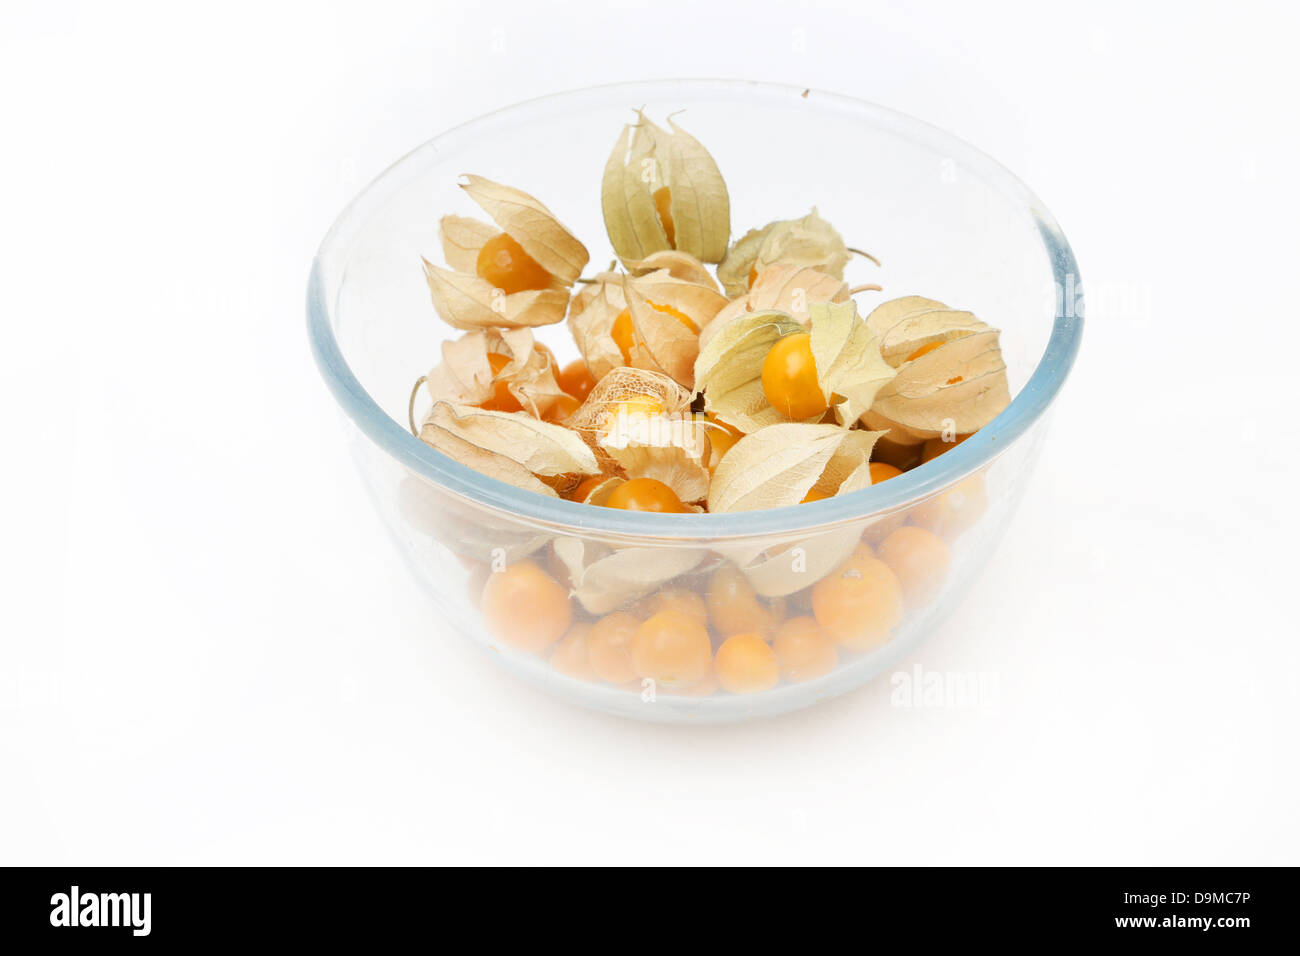 A Bowl Of Ripe Cape Gooseberries (Physalis Peruviana) All In Their Calyx From The Nightshade Family Stock Photo